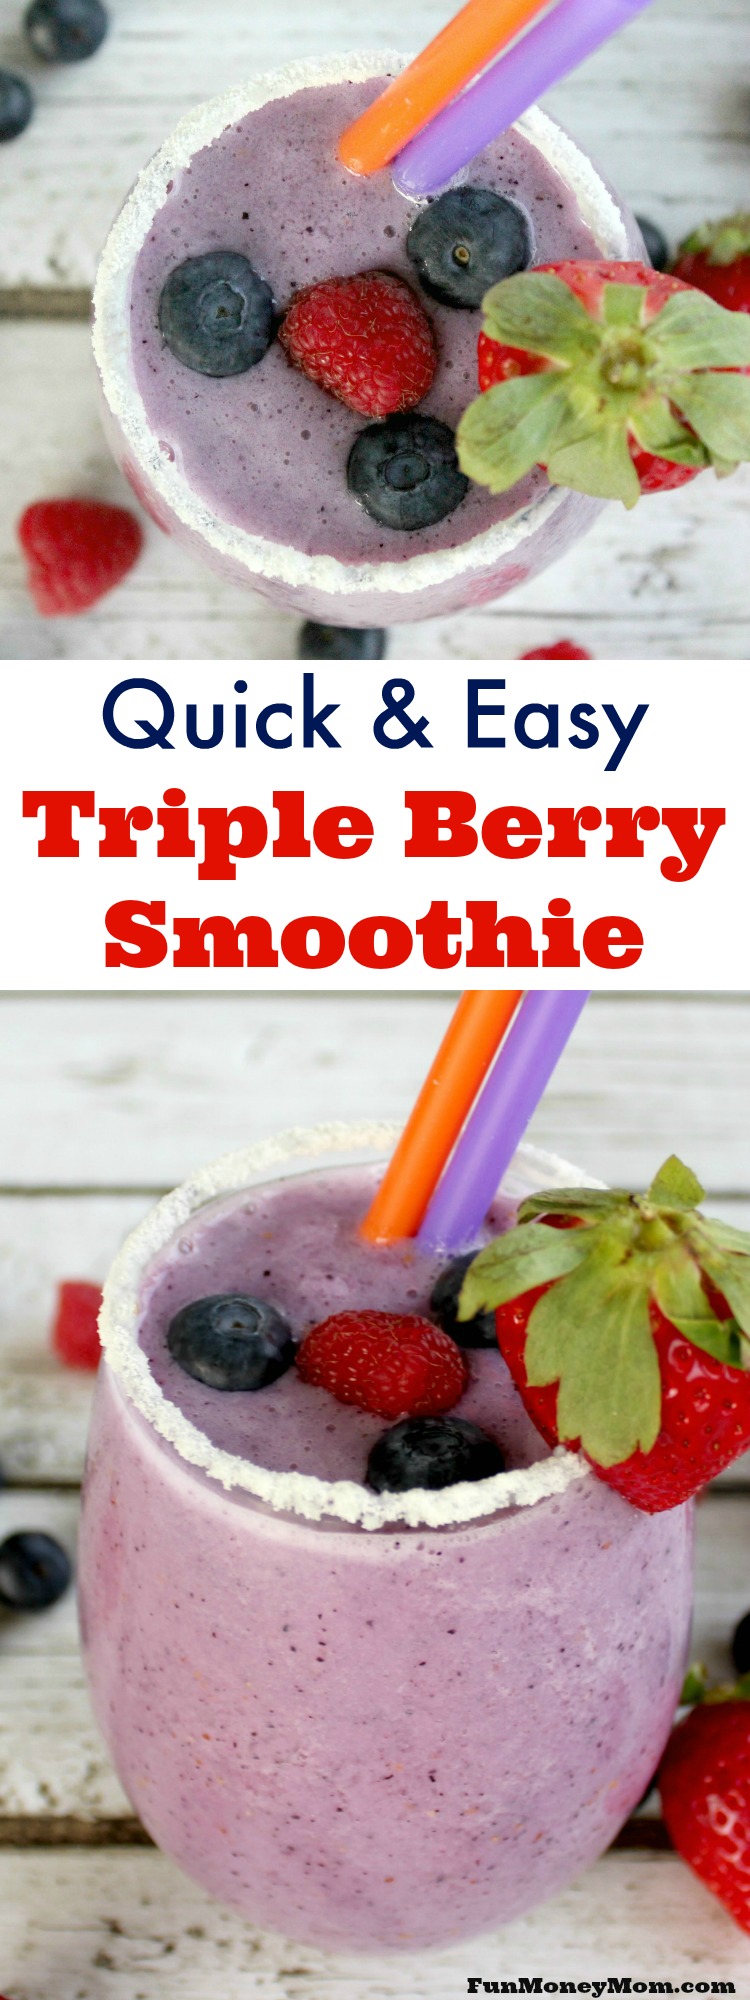 This delicious fresh berry smoothie is not only delicious, it's healthy too! It's perfect for a quick breakfast or as a summer treat.